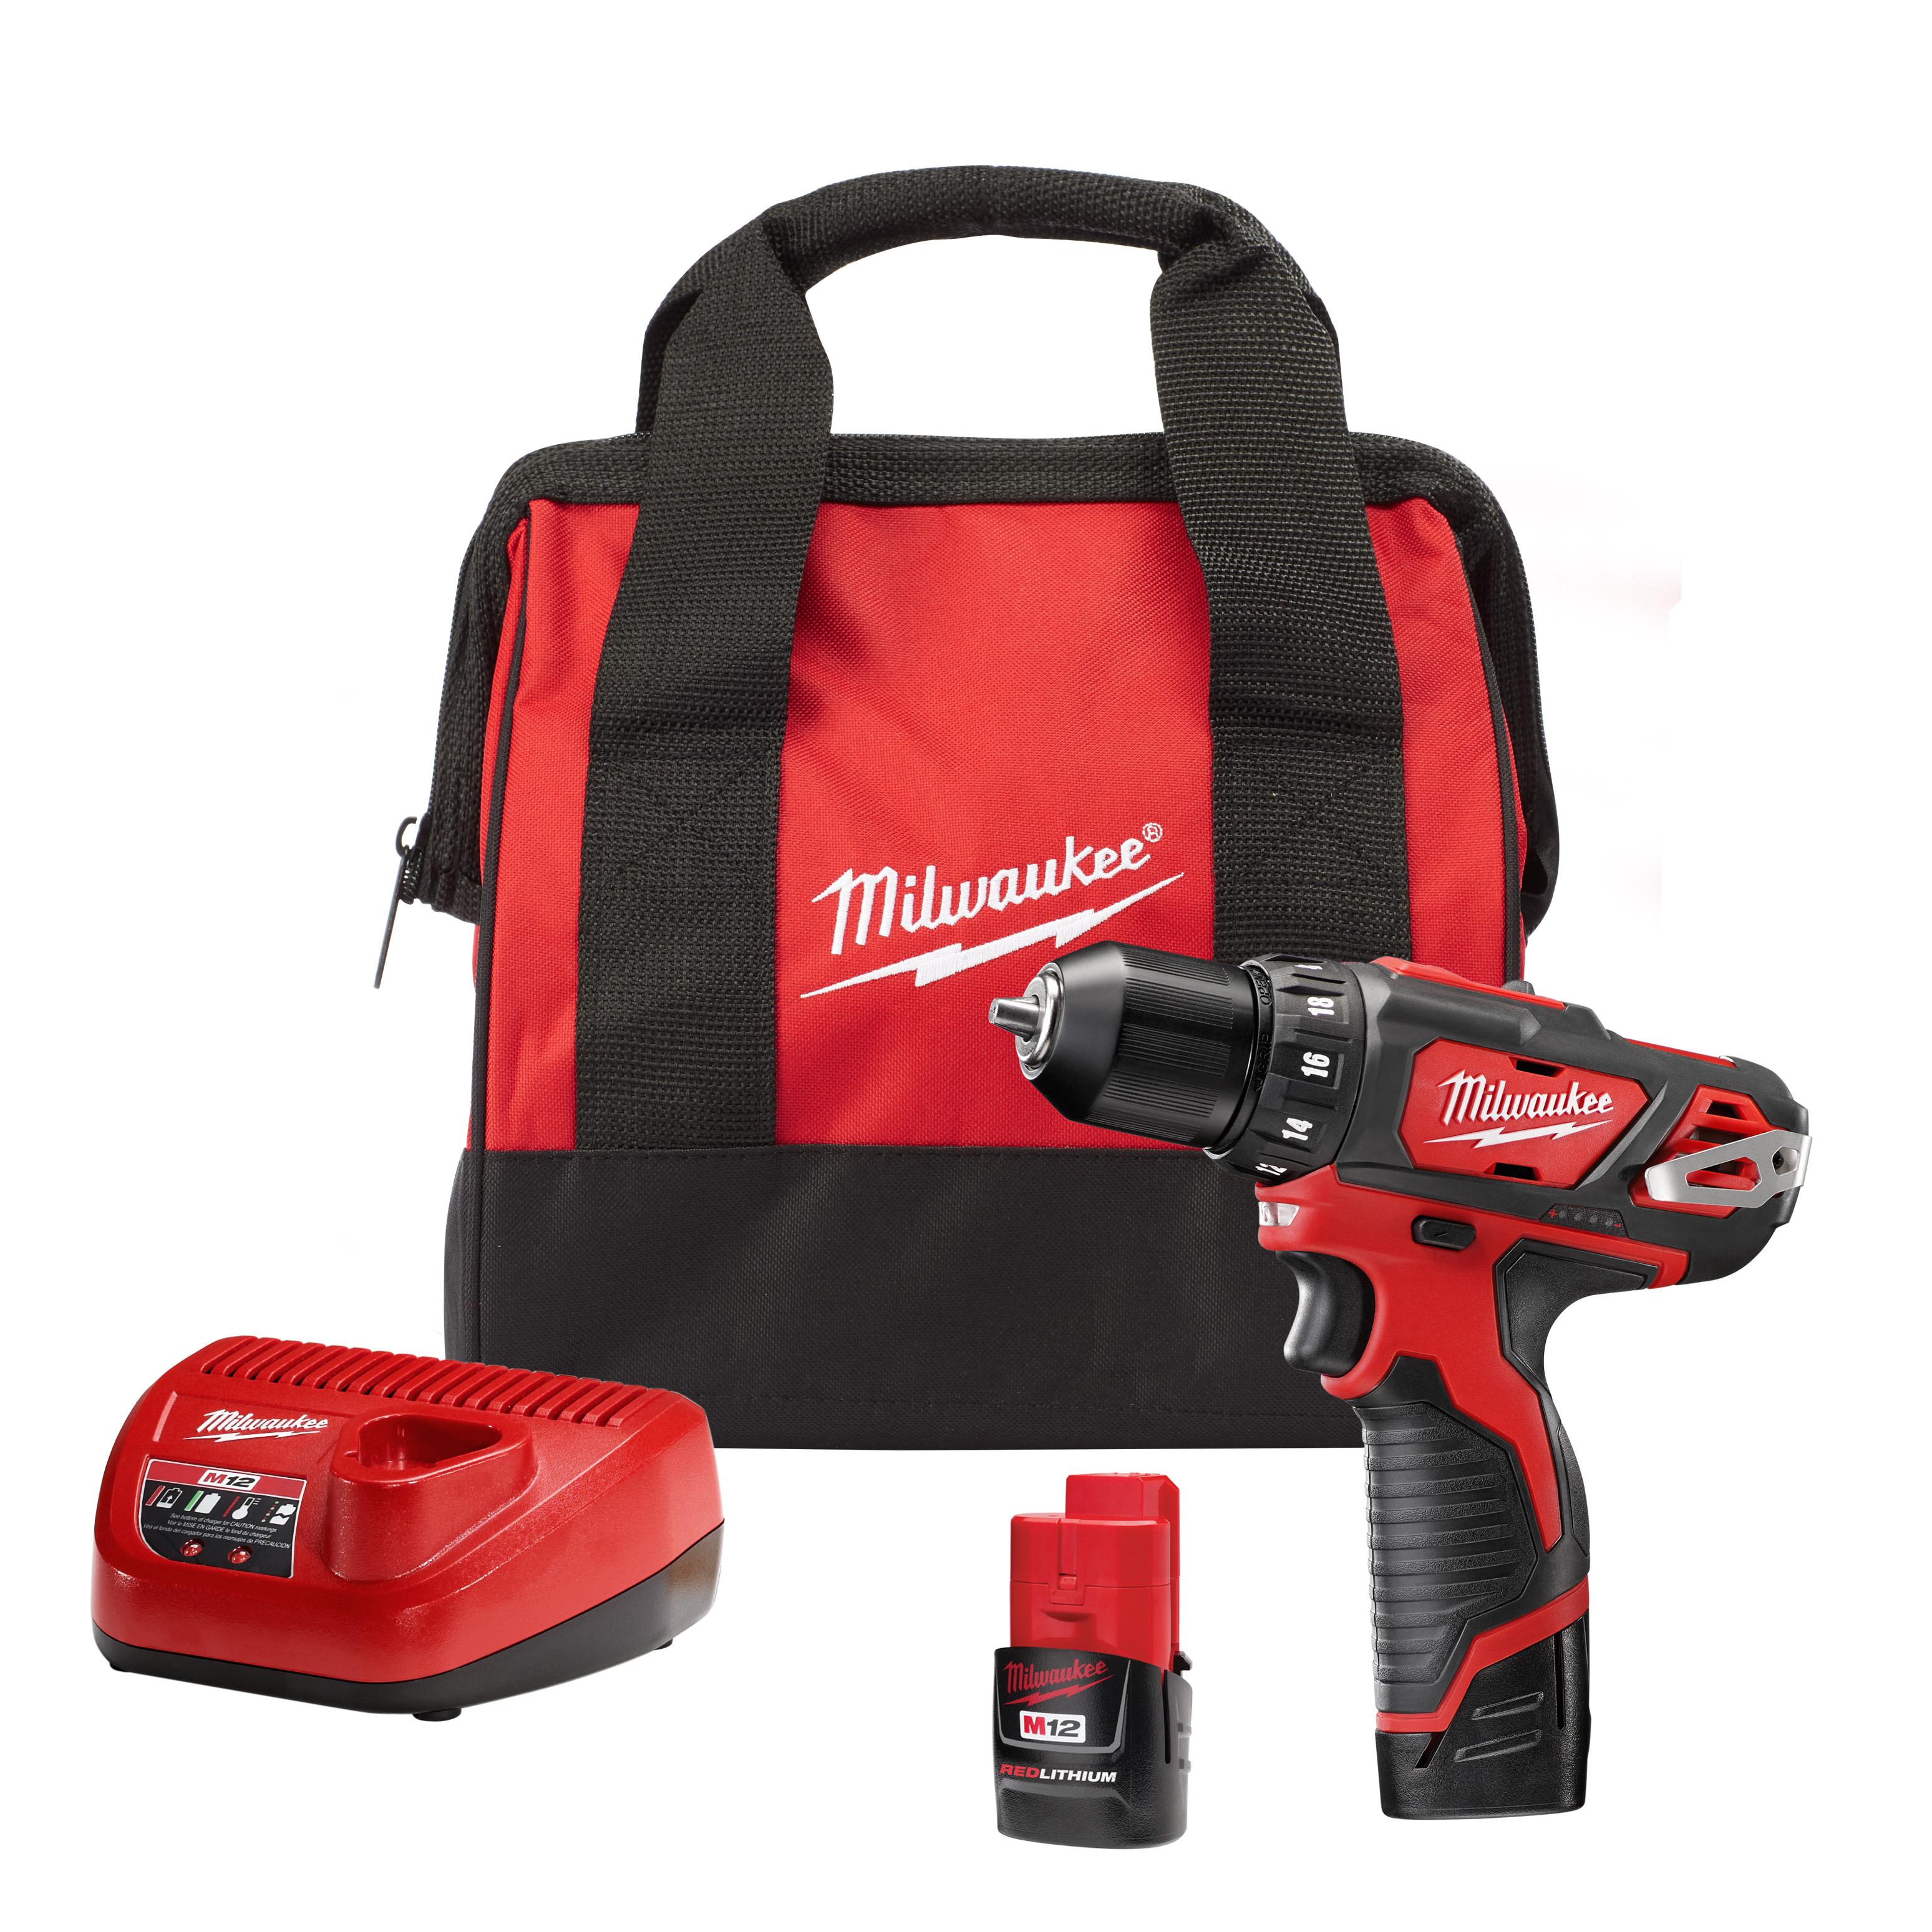 Milwaukee® M12™ 2407-20 Compact Lightweight Cordless Drill/Driver, 3/8 in Chuck, 12 VDC, 0 to 400/0 to 1500 rpm No-Load, 7-3/8 in OAL, Lithium-Ion Battery